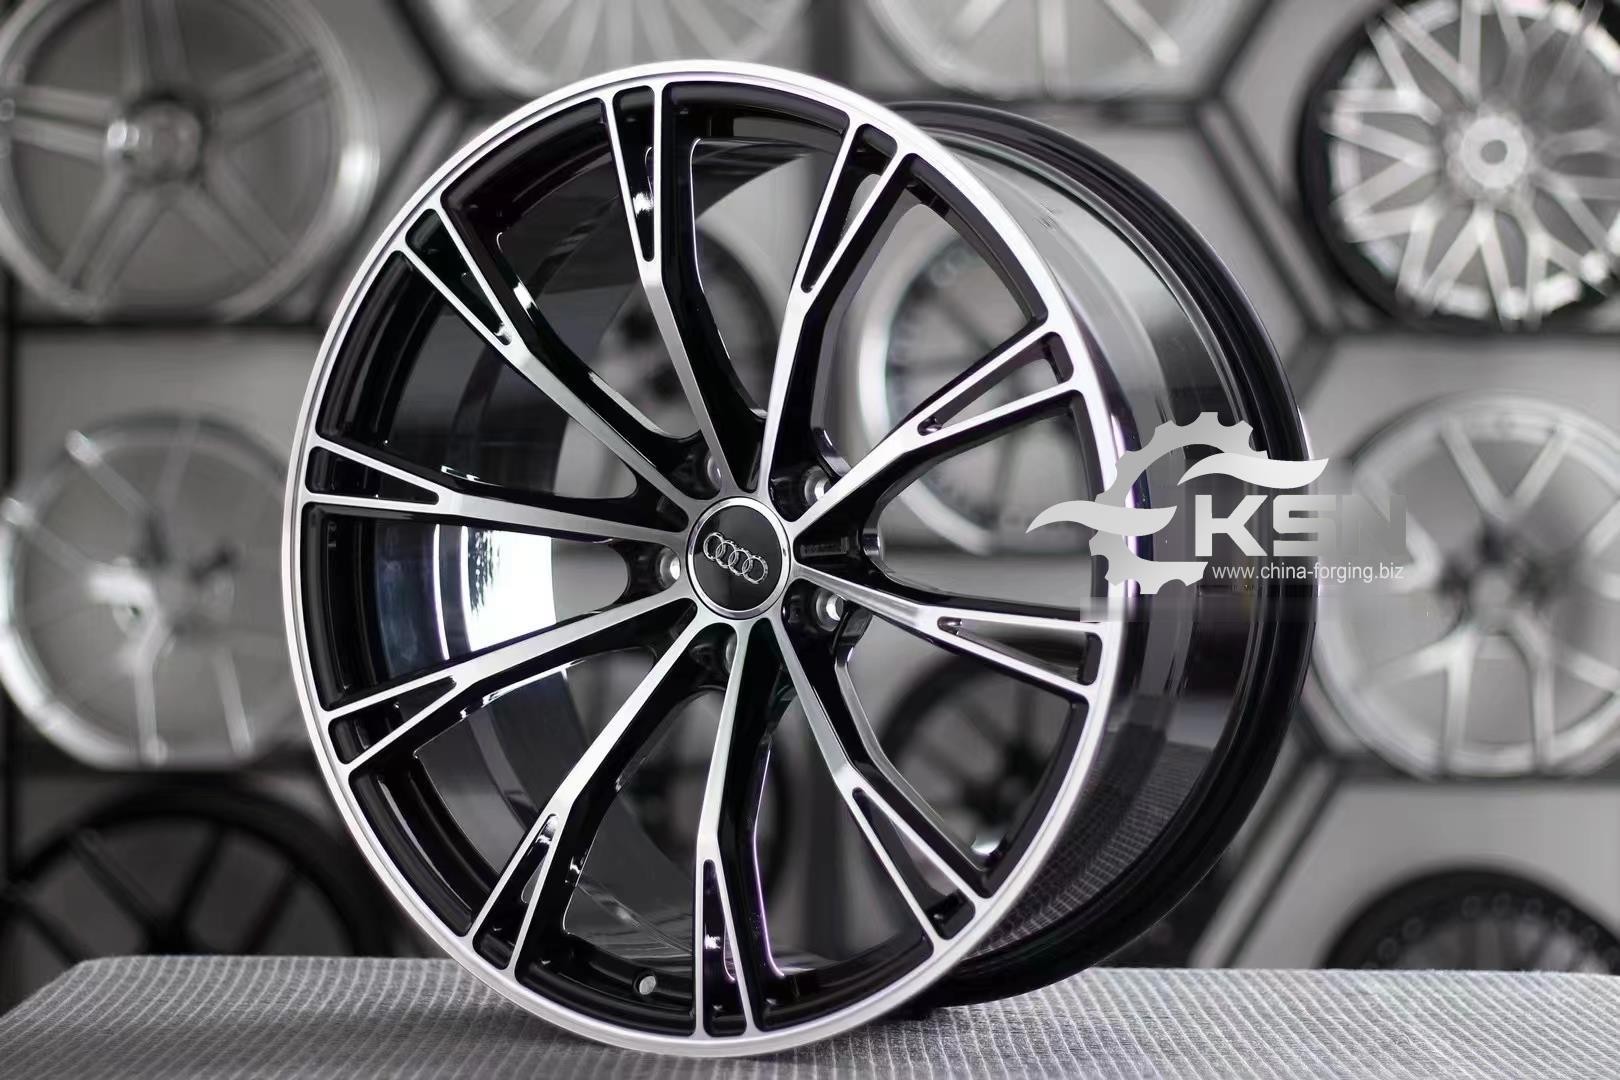 Custom Audi ABT style forging wheels with bright black and machined surface